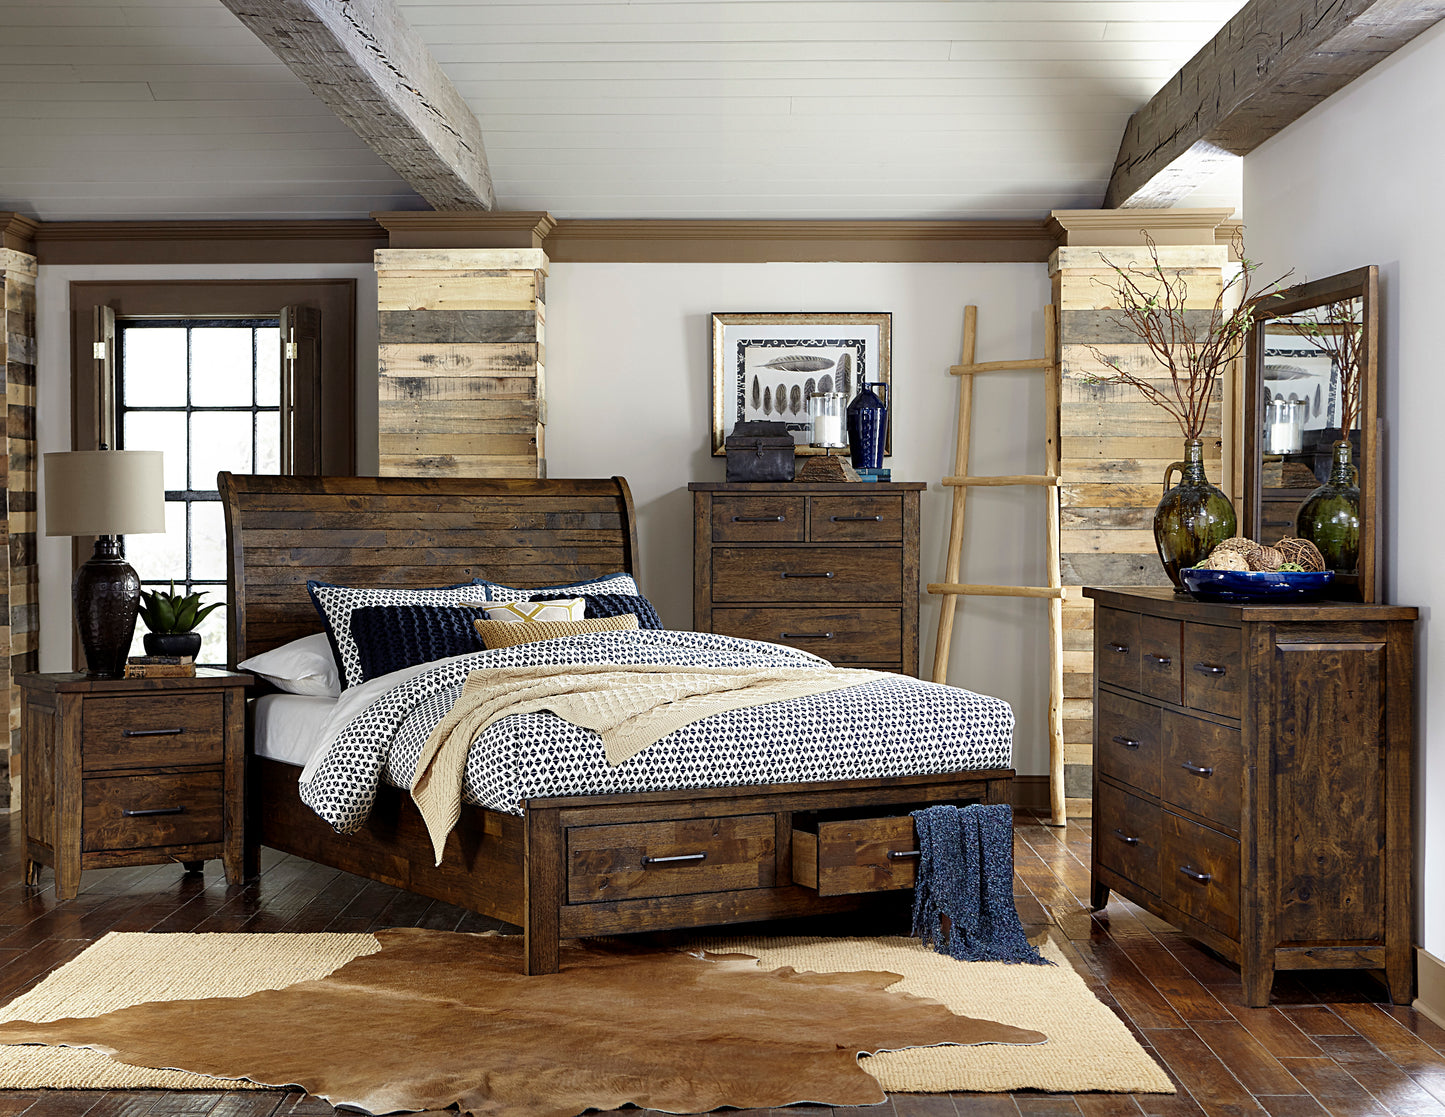 Jacoby Rustic 4PC Bedroom Set E King Sleigh Storage Bed, Dresser, Mirror, Nightstand in Country Brown